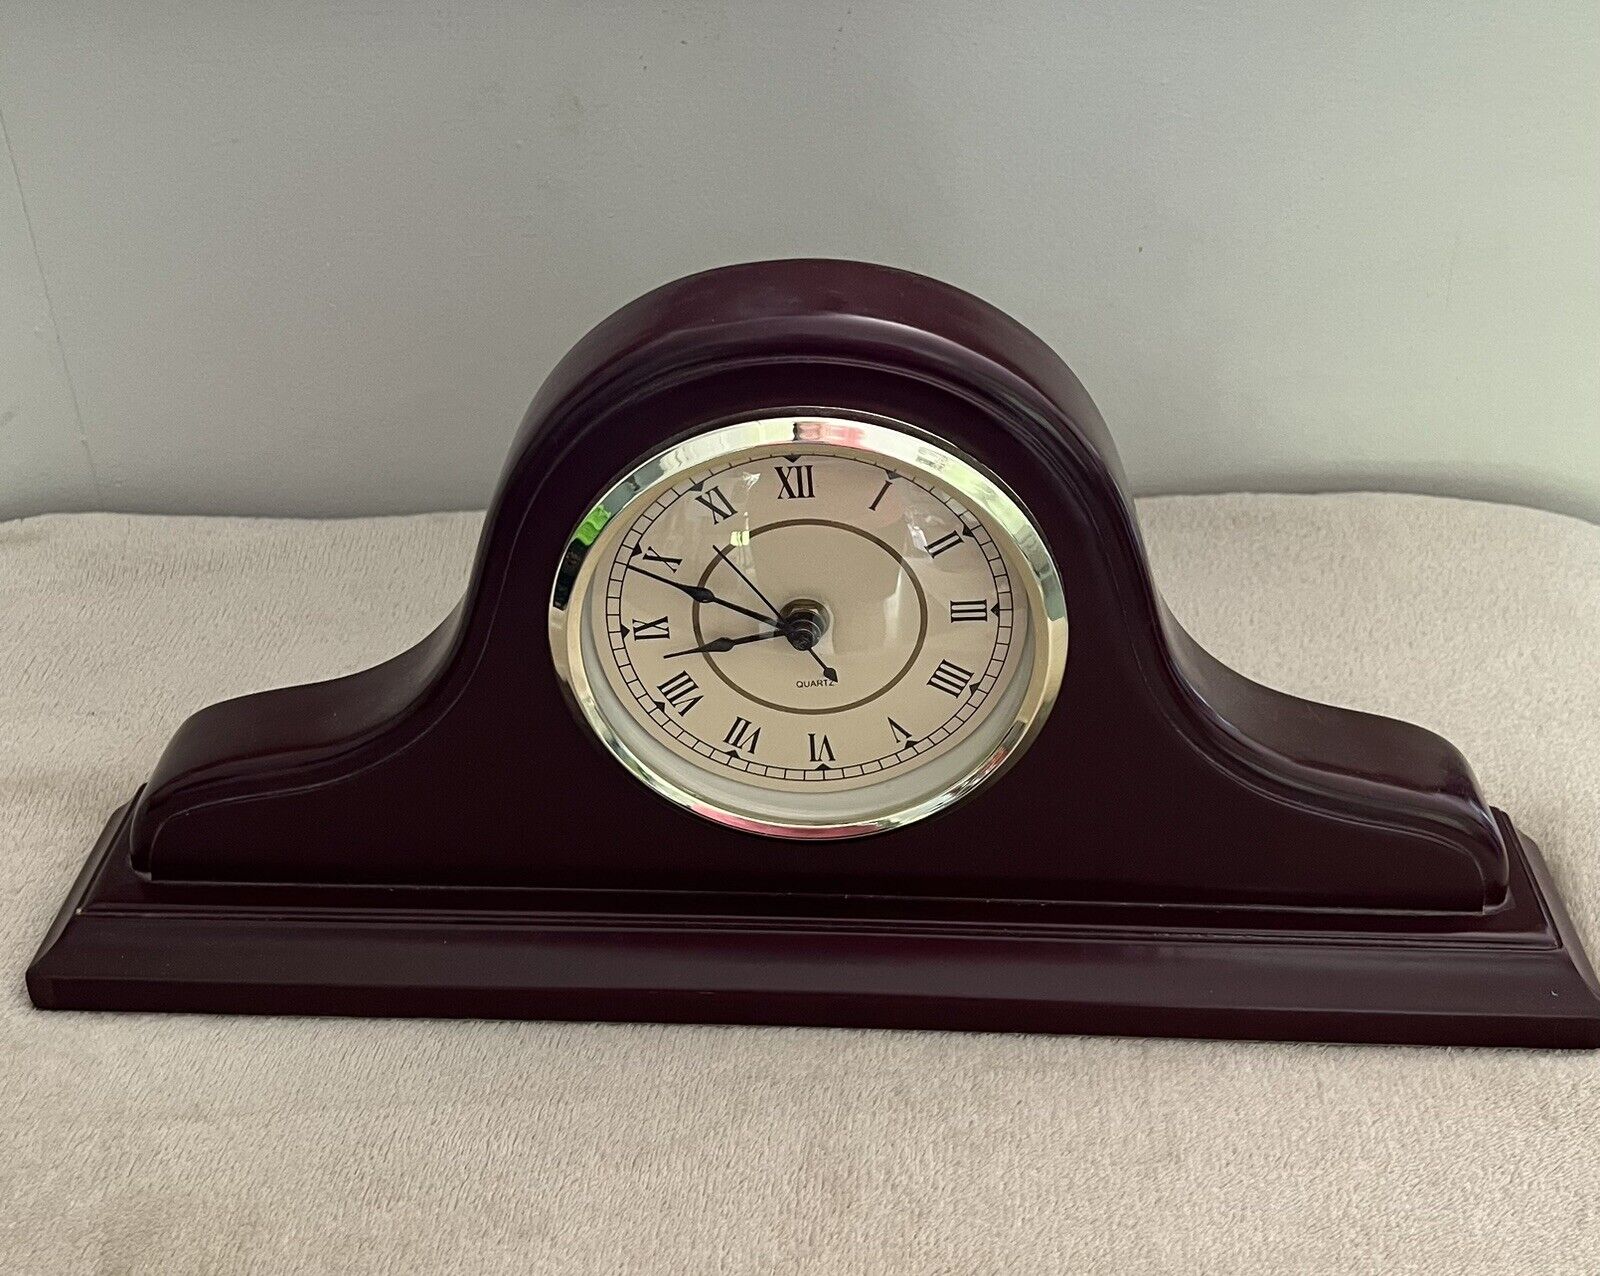 The Bombay Company Mantle Clock Battery Operated 19”x7.5”